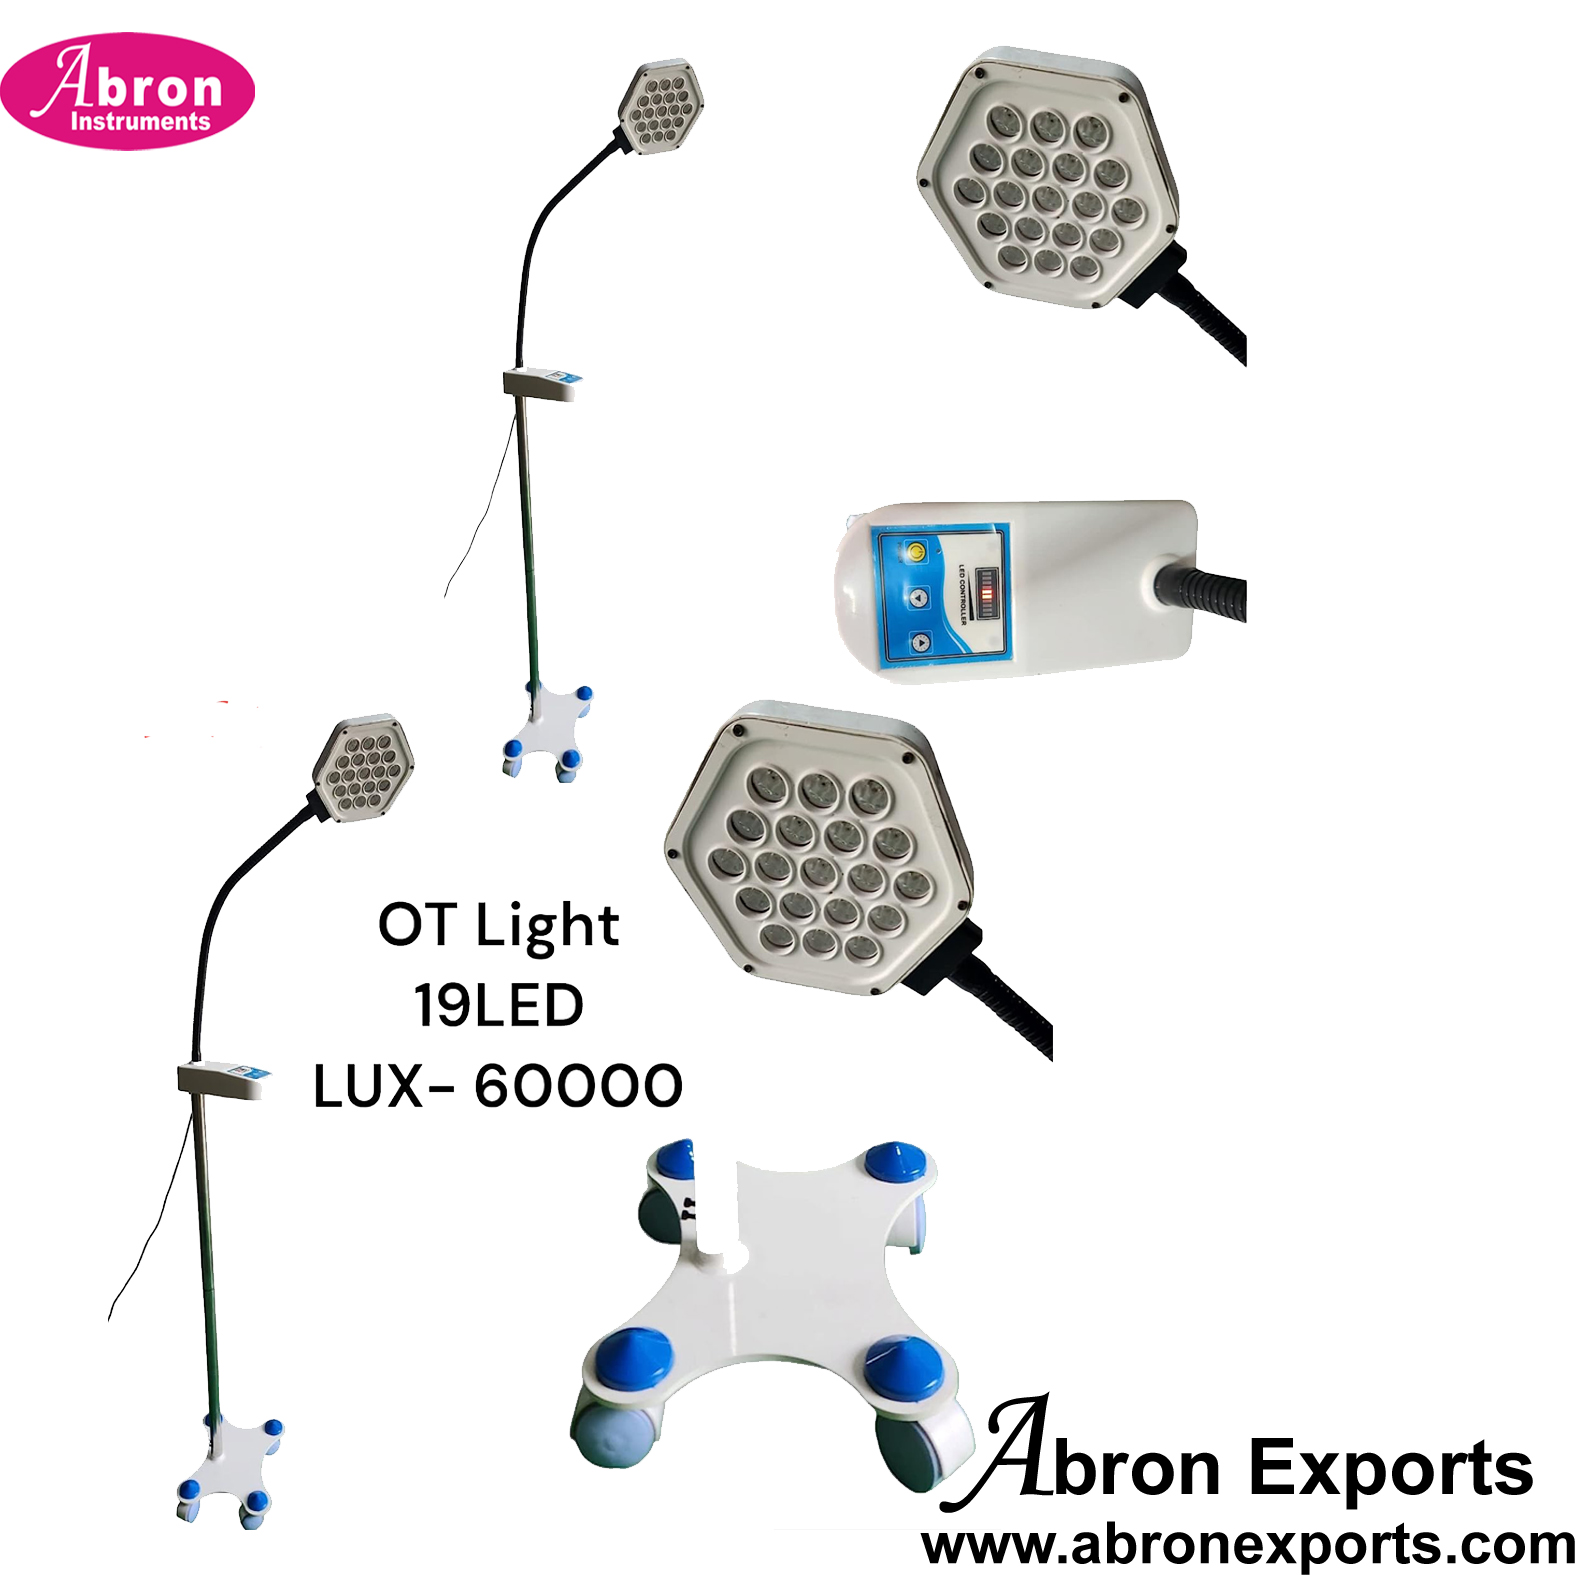 OT Light shadowless Mobile 19 LED 60,000 Lux with controlls on wheels adjustable angle Abron ABM-2369M19L60 